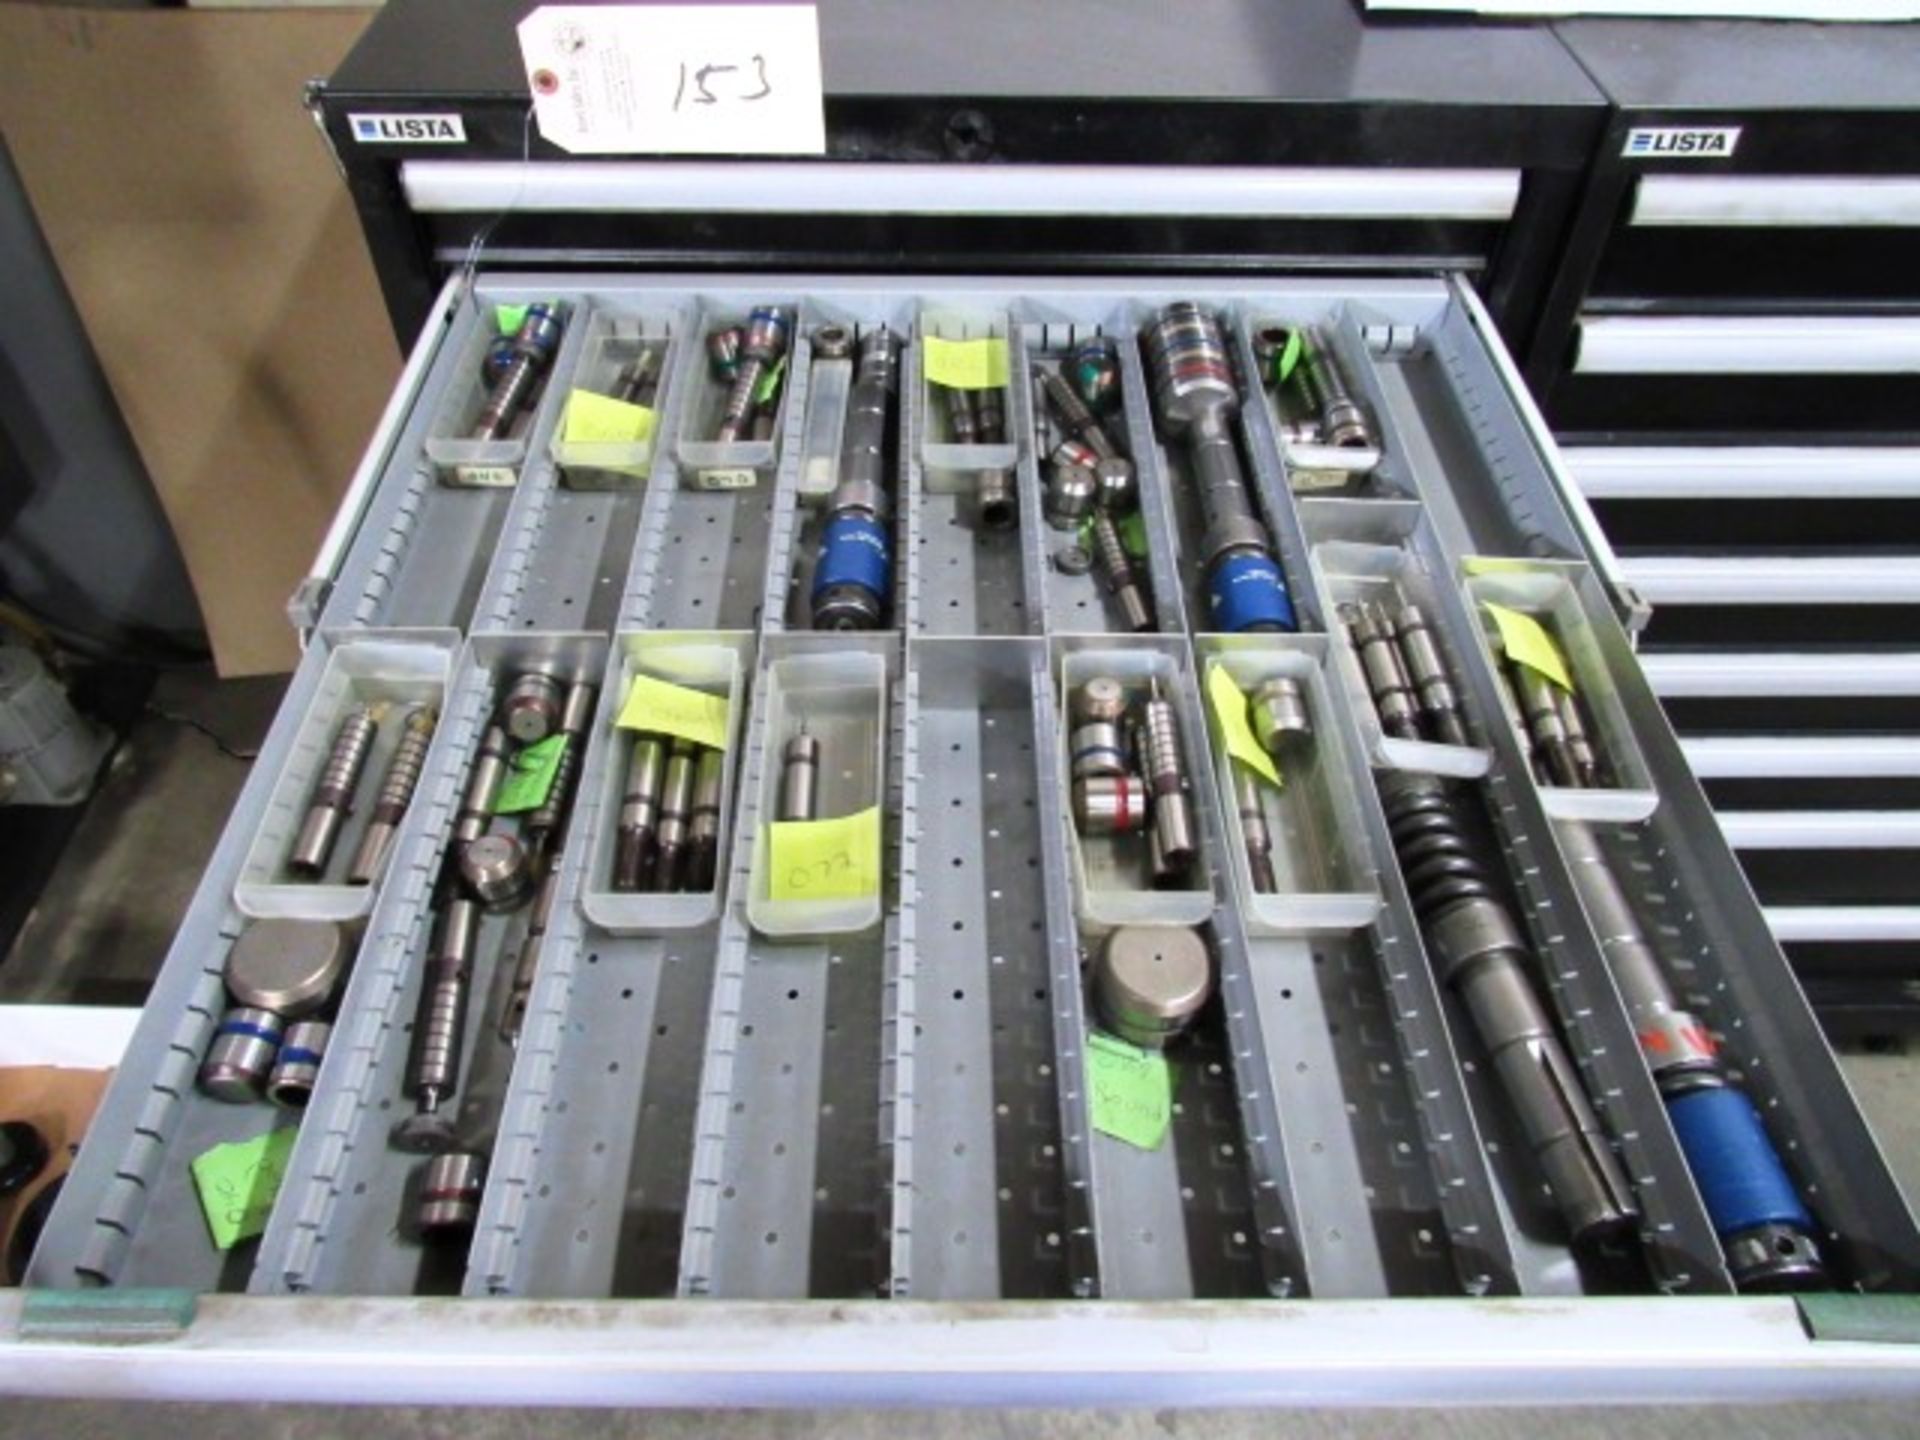 Lista 11 Drawer Tool Cabinet with Wilson & Mate Turret Punch Tooling - Image 11 of 12